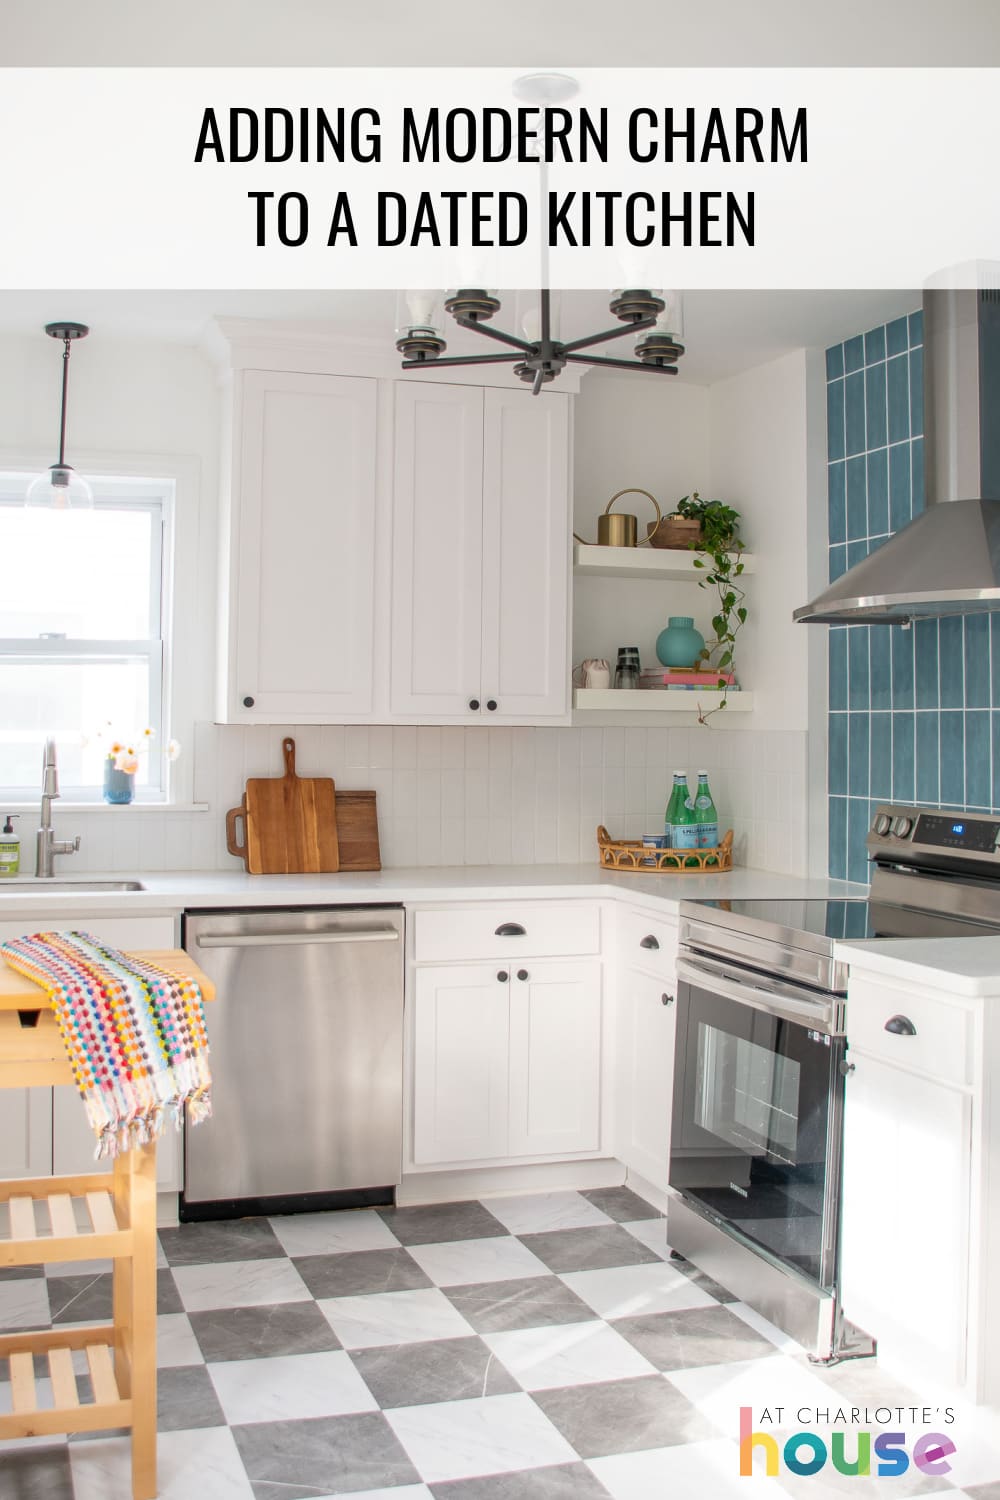 ADDING MODERN CHARM TO A DATED KITCHEN 1 